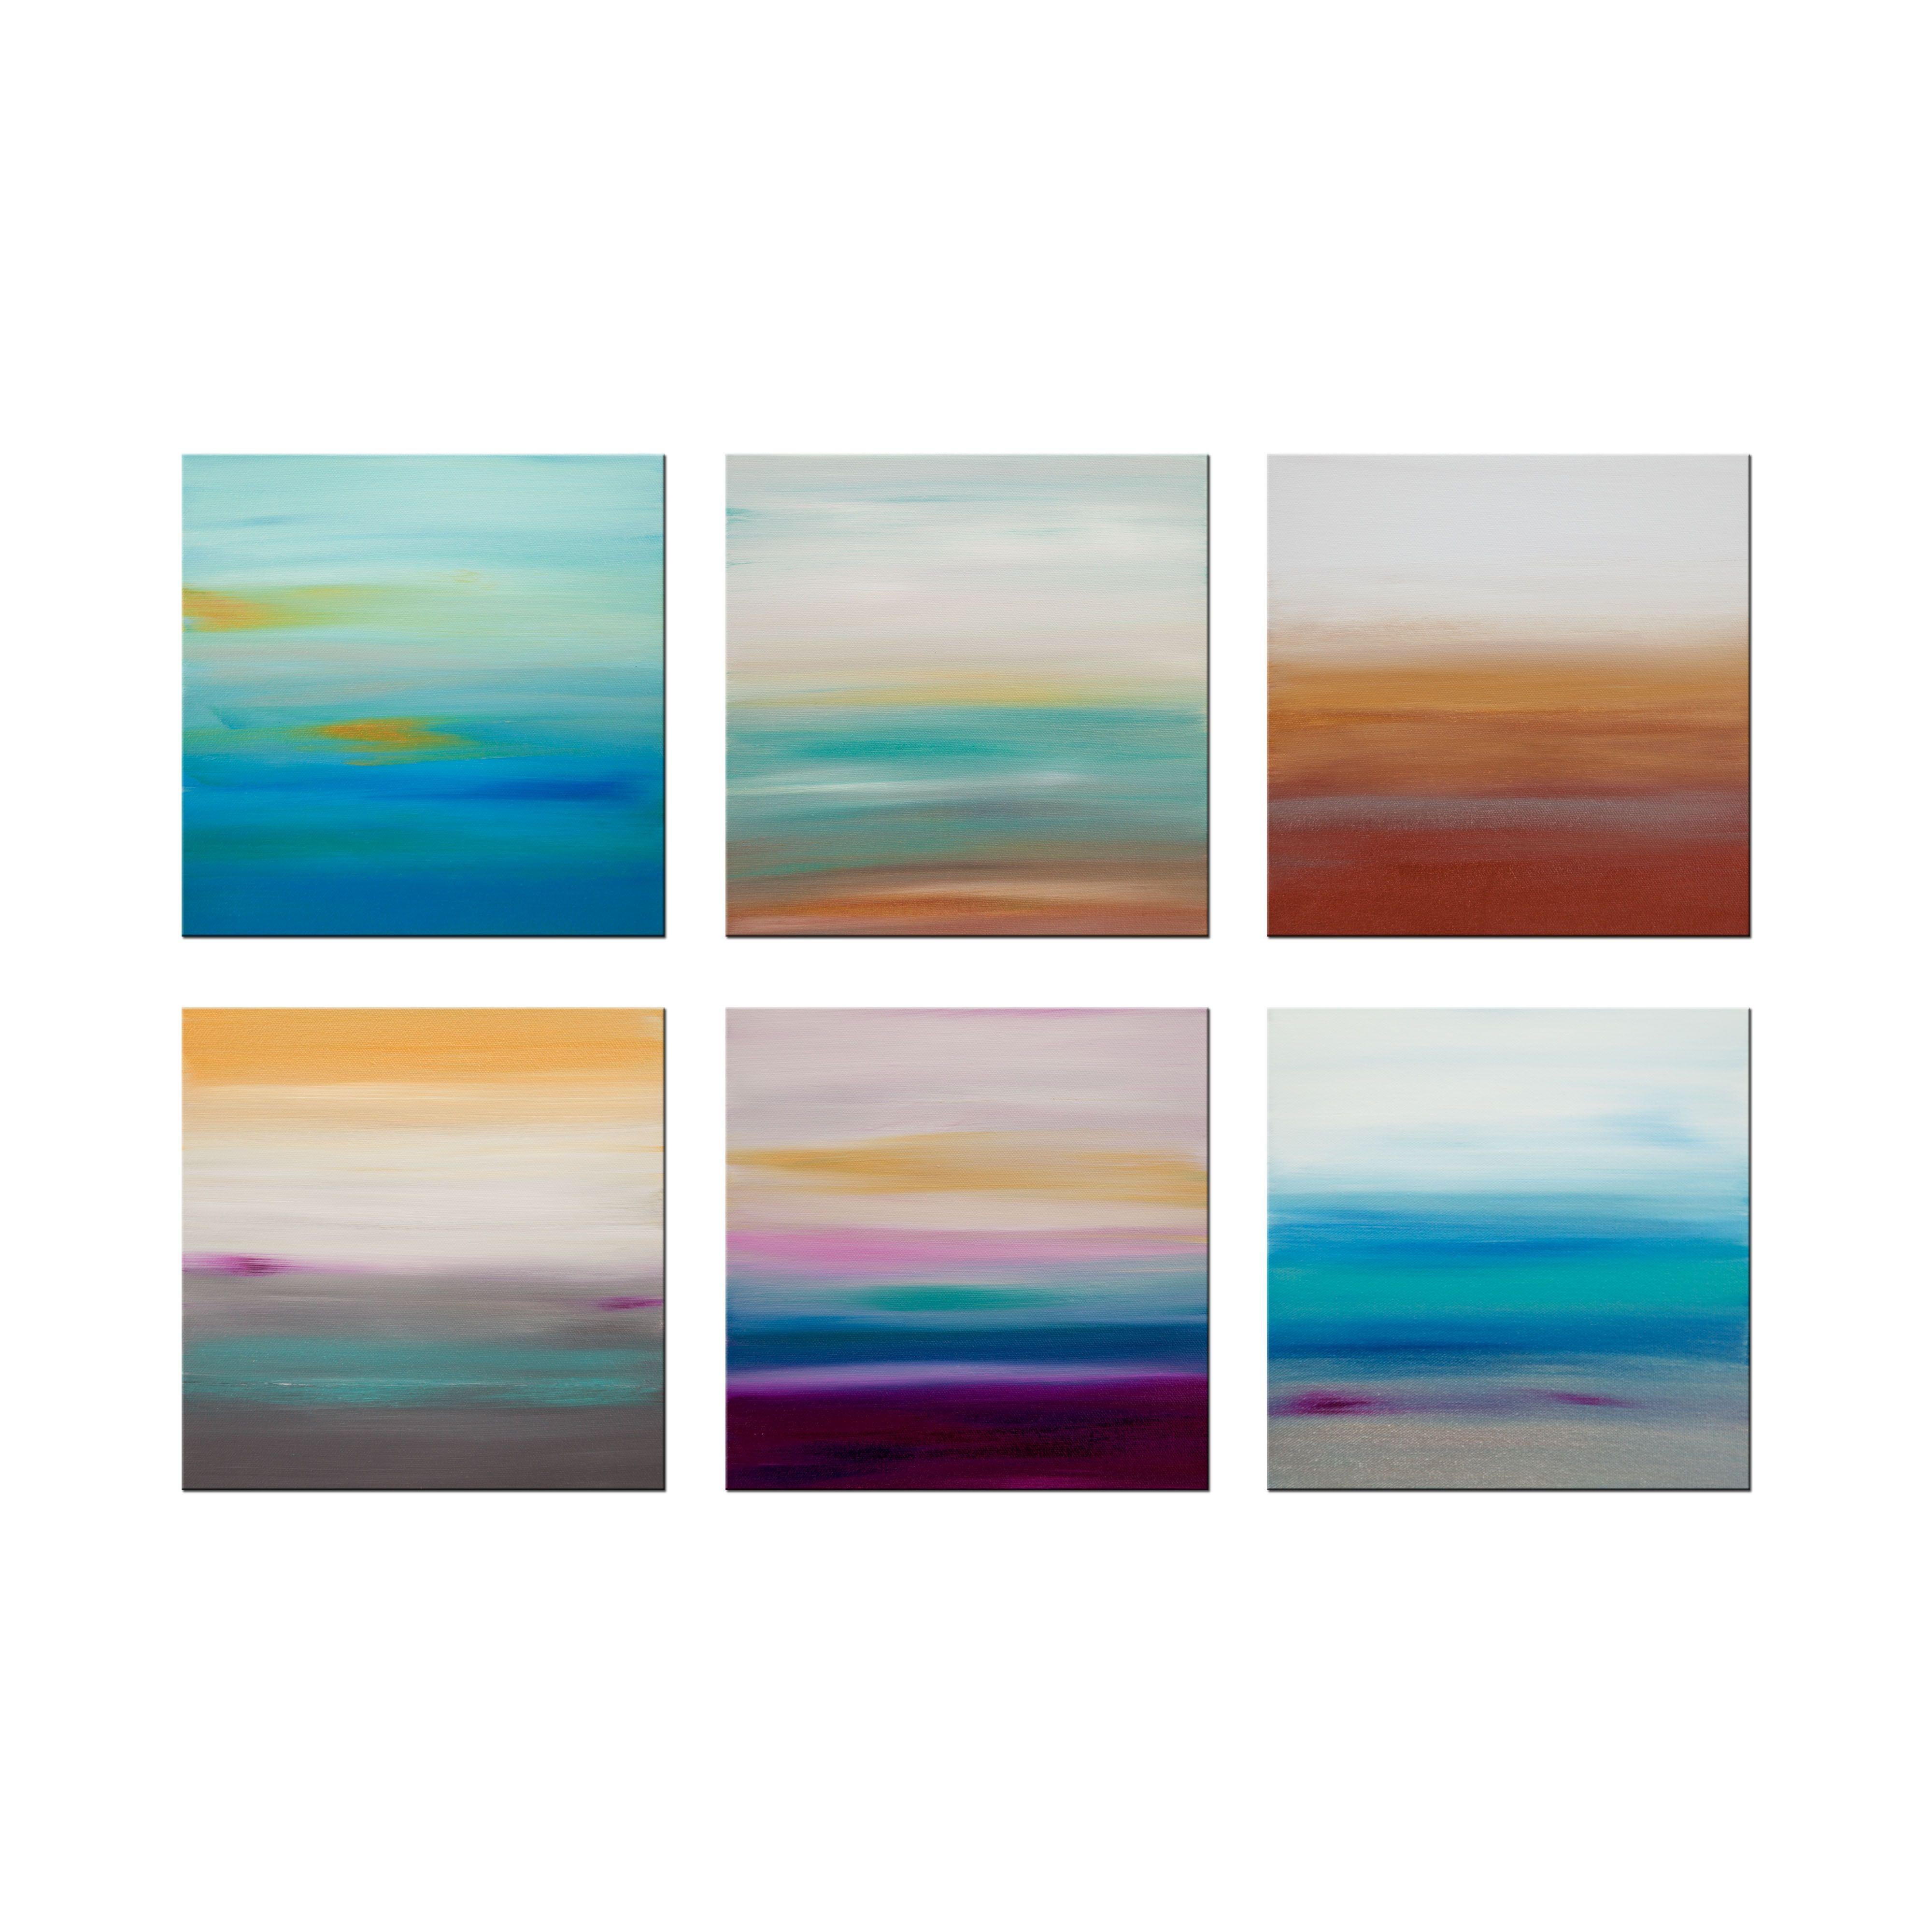 Sunrise Series Collection 10 is an original painting created with acrylic paint on gallery-wrapped canvas. It has a width of 30 inches and a height of 20 inches with a depth of 1.5 inches (20x30x1.5). There are six, individual 10x10x1.5 inch